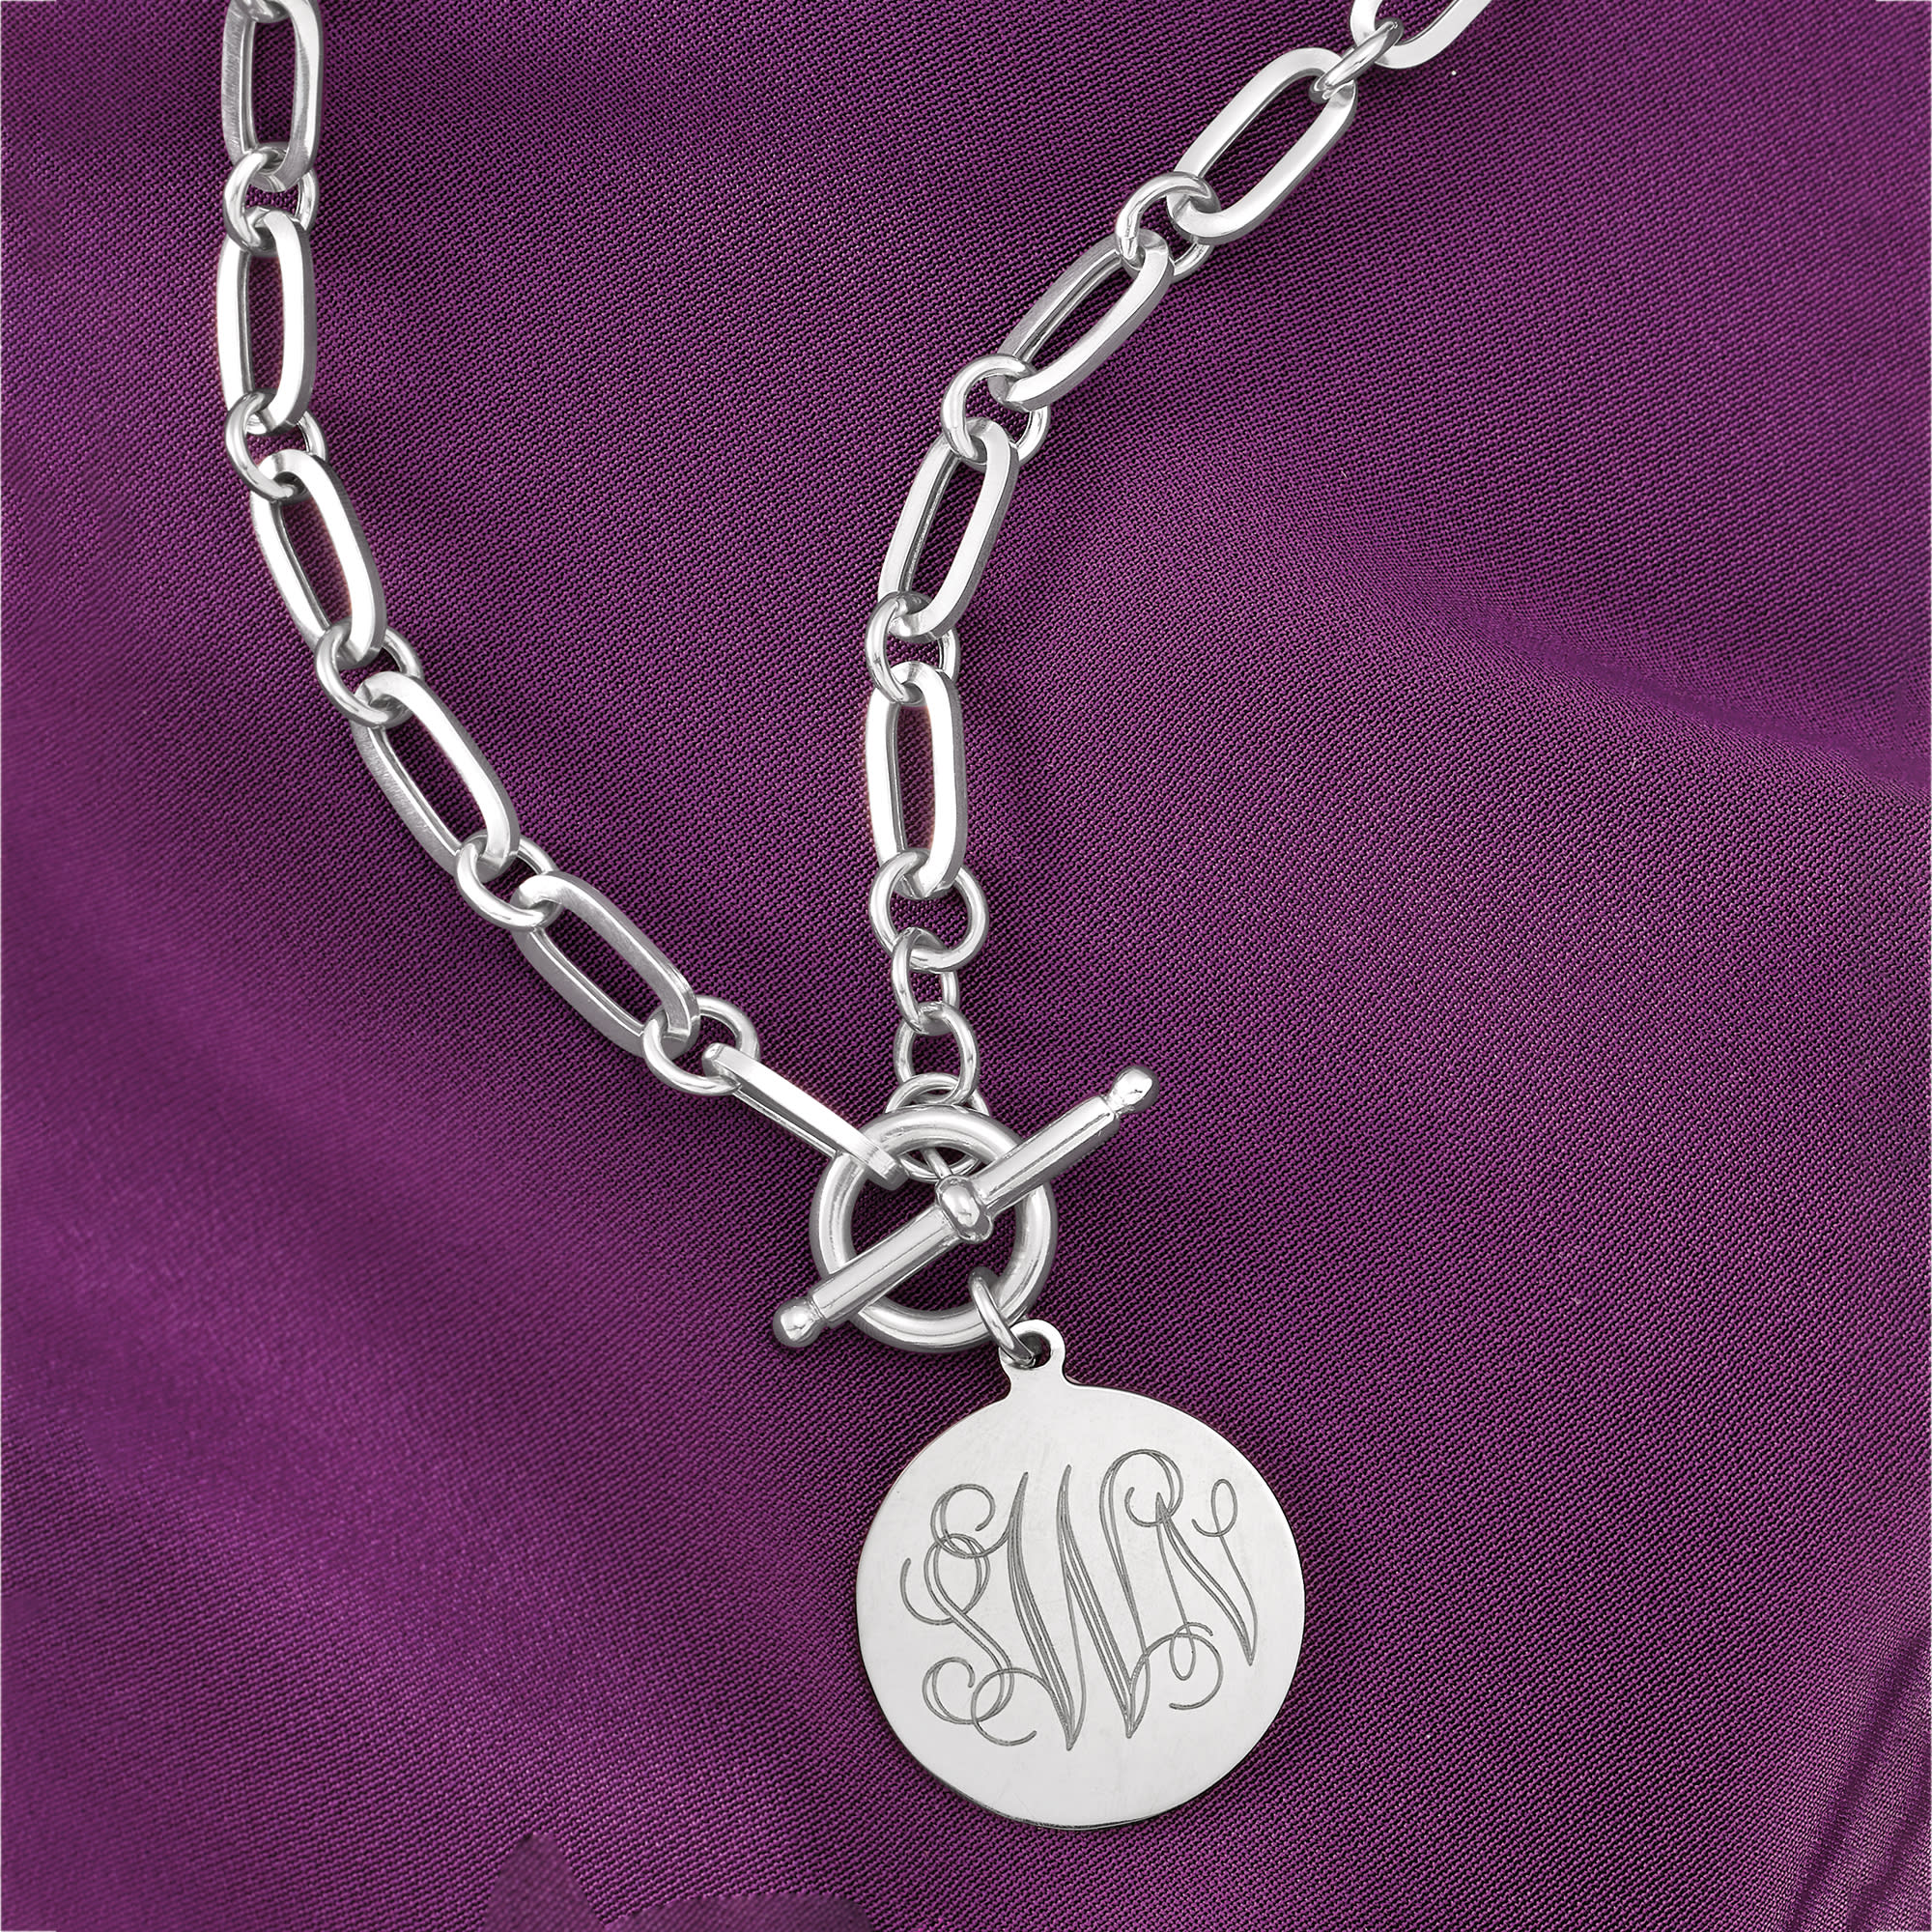 Personalized Toggle Necklace With Monogram Initials Charm 